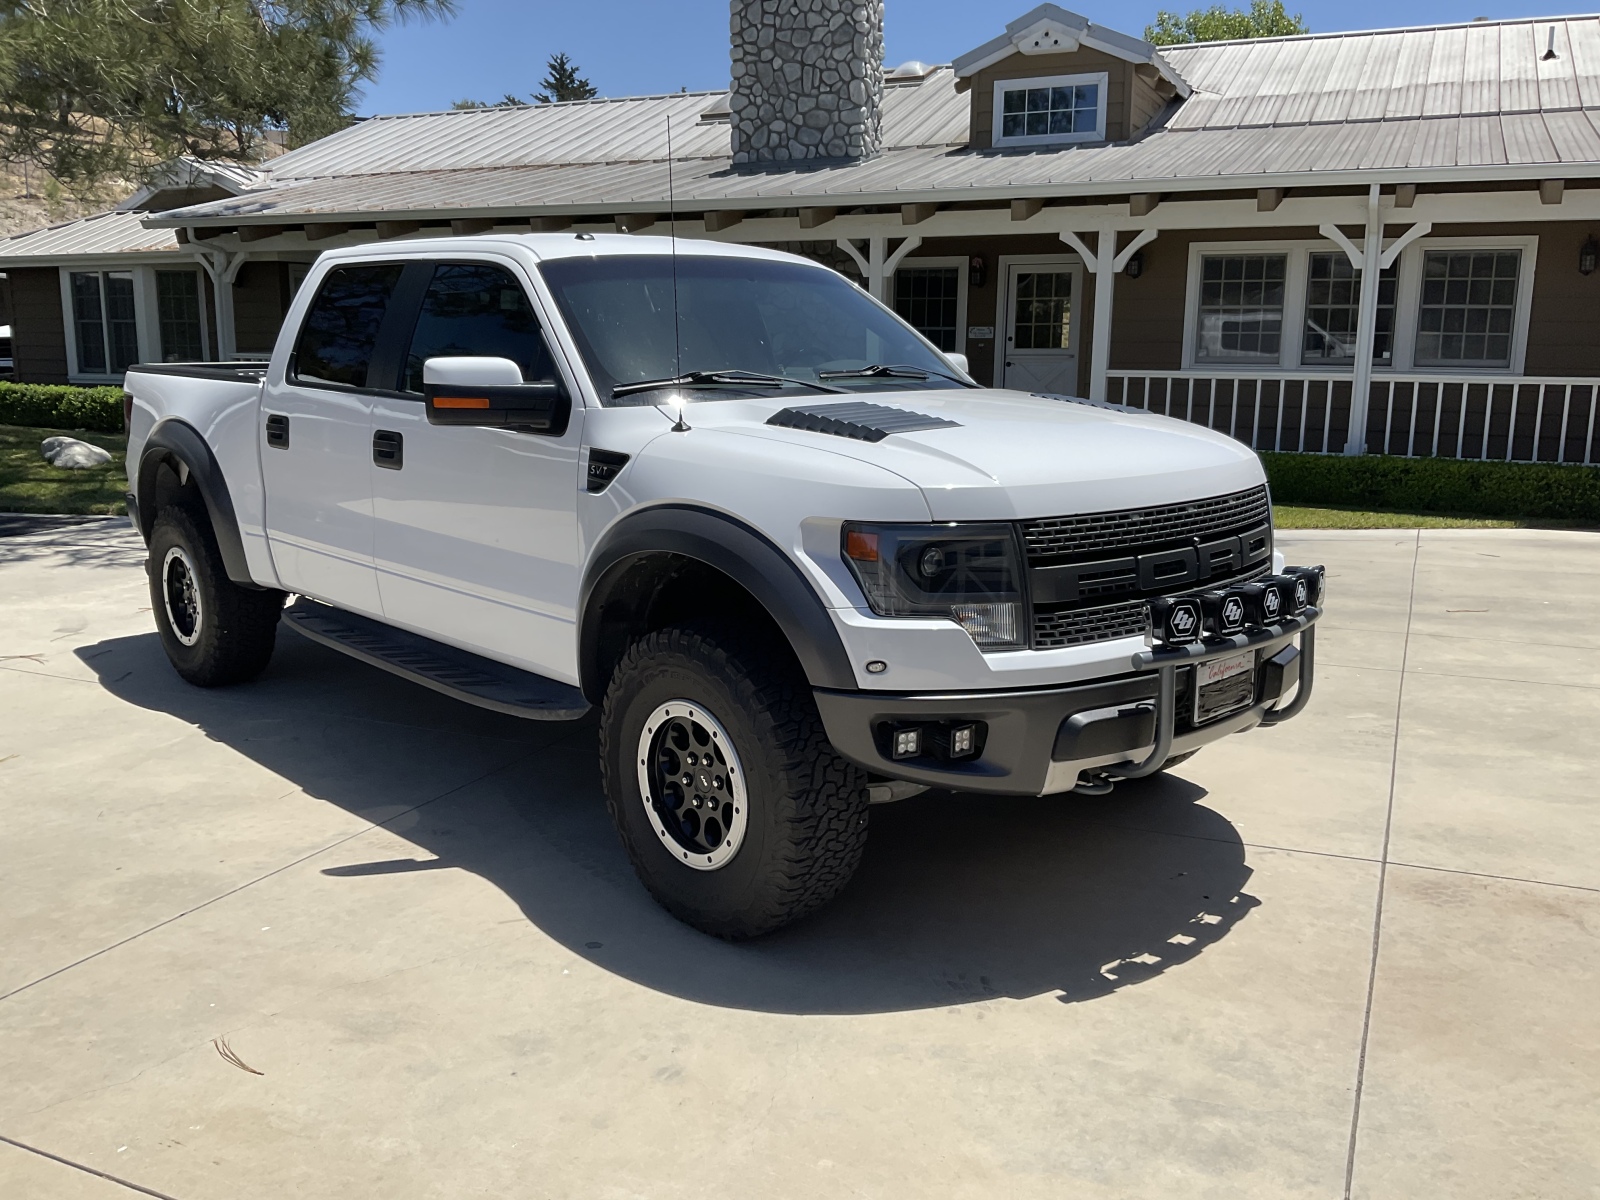 For Sale: 2014 Ford Raptor crew cab - photo0